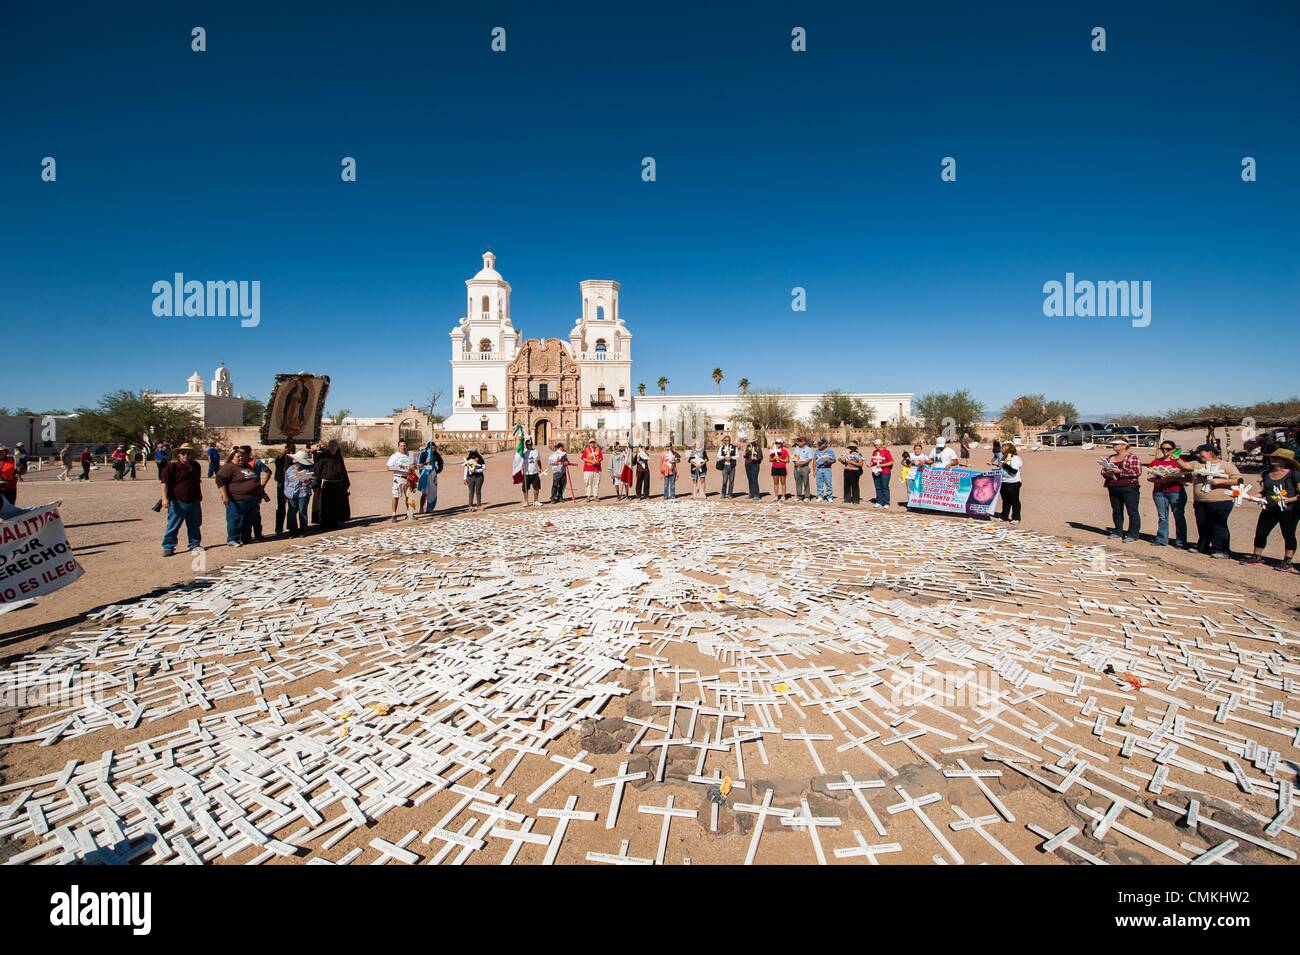 Tucson, Arizona, USA. 2nd Nov, 2013. More than 100 people walked eight miles from Tucson, Ariz. to Mission San Xavier del Bac, a Spanish colonial mission, in an El Dia de los Muertos procession remembering people who died crossing the Arizona desert between Mexico and the U.S. According to the human rights group Derechos Humanos, 129 bodies have been found in Tucson Sector between Oct. 2012 and June 2013. More than 2,500 bodies have been found in the desert since 2000; many of whom are unidentified. Each of the white crosses represents one dead migrant. Stock Photo